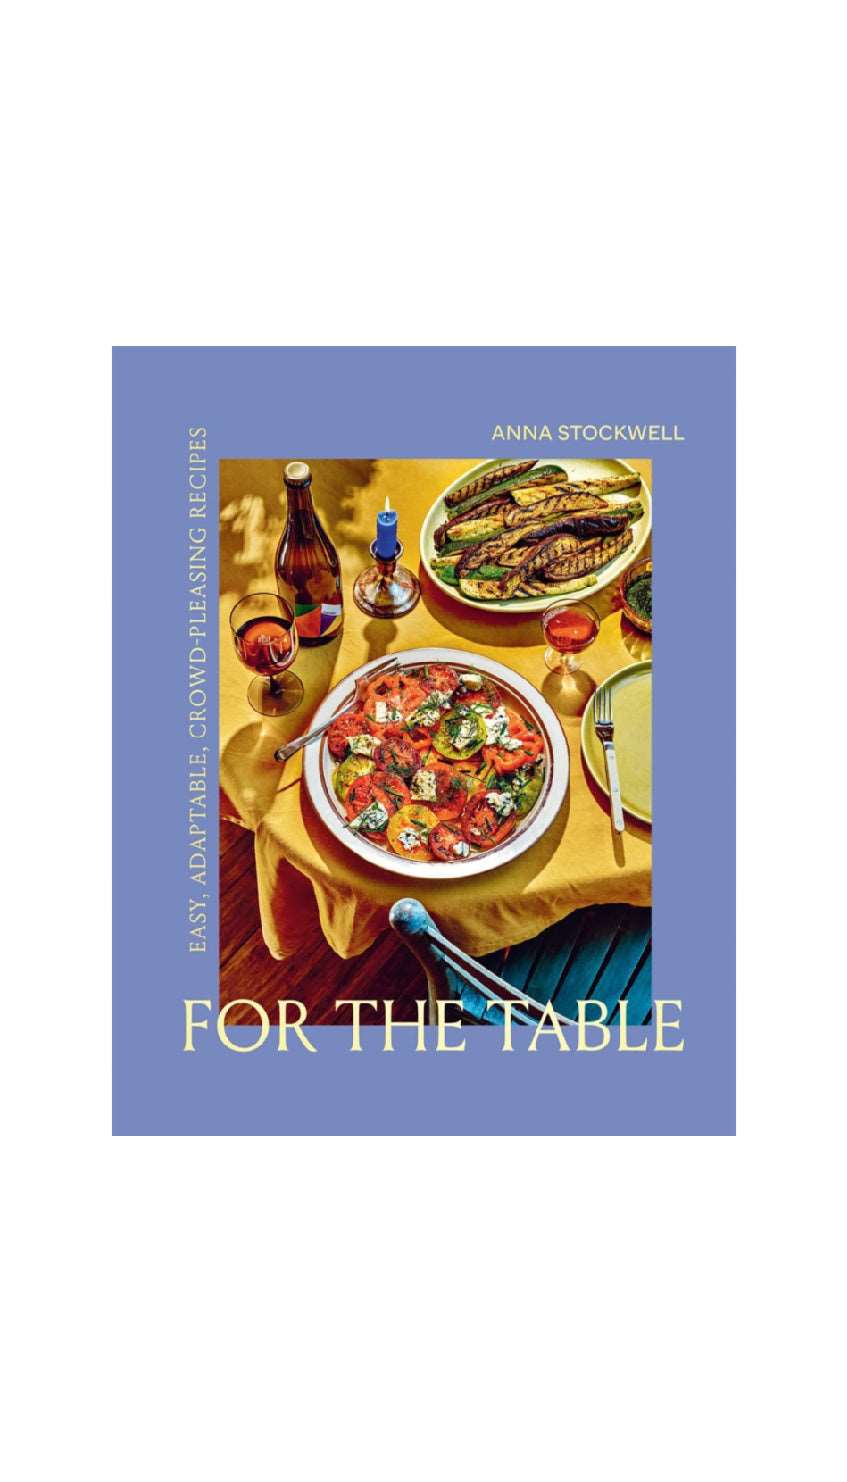 For The Table / ANNA STOCKWELL